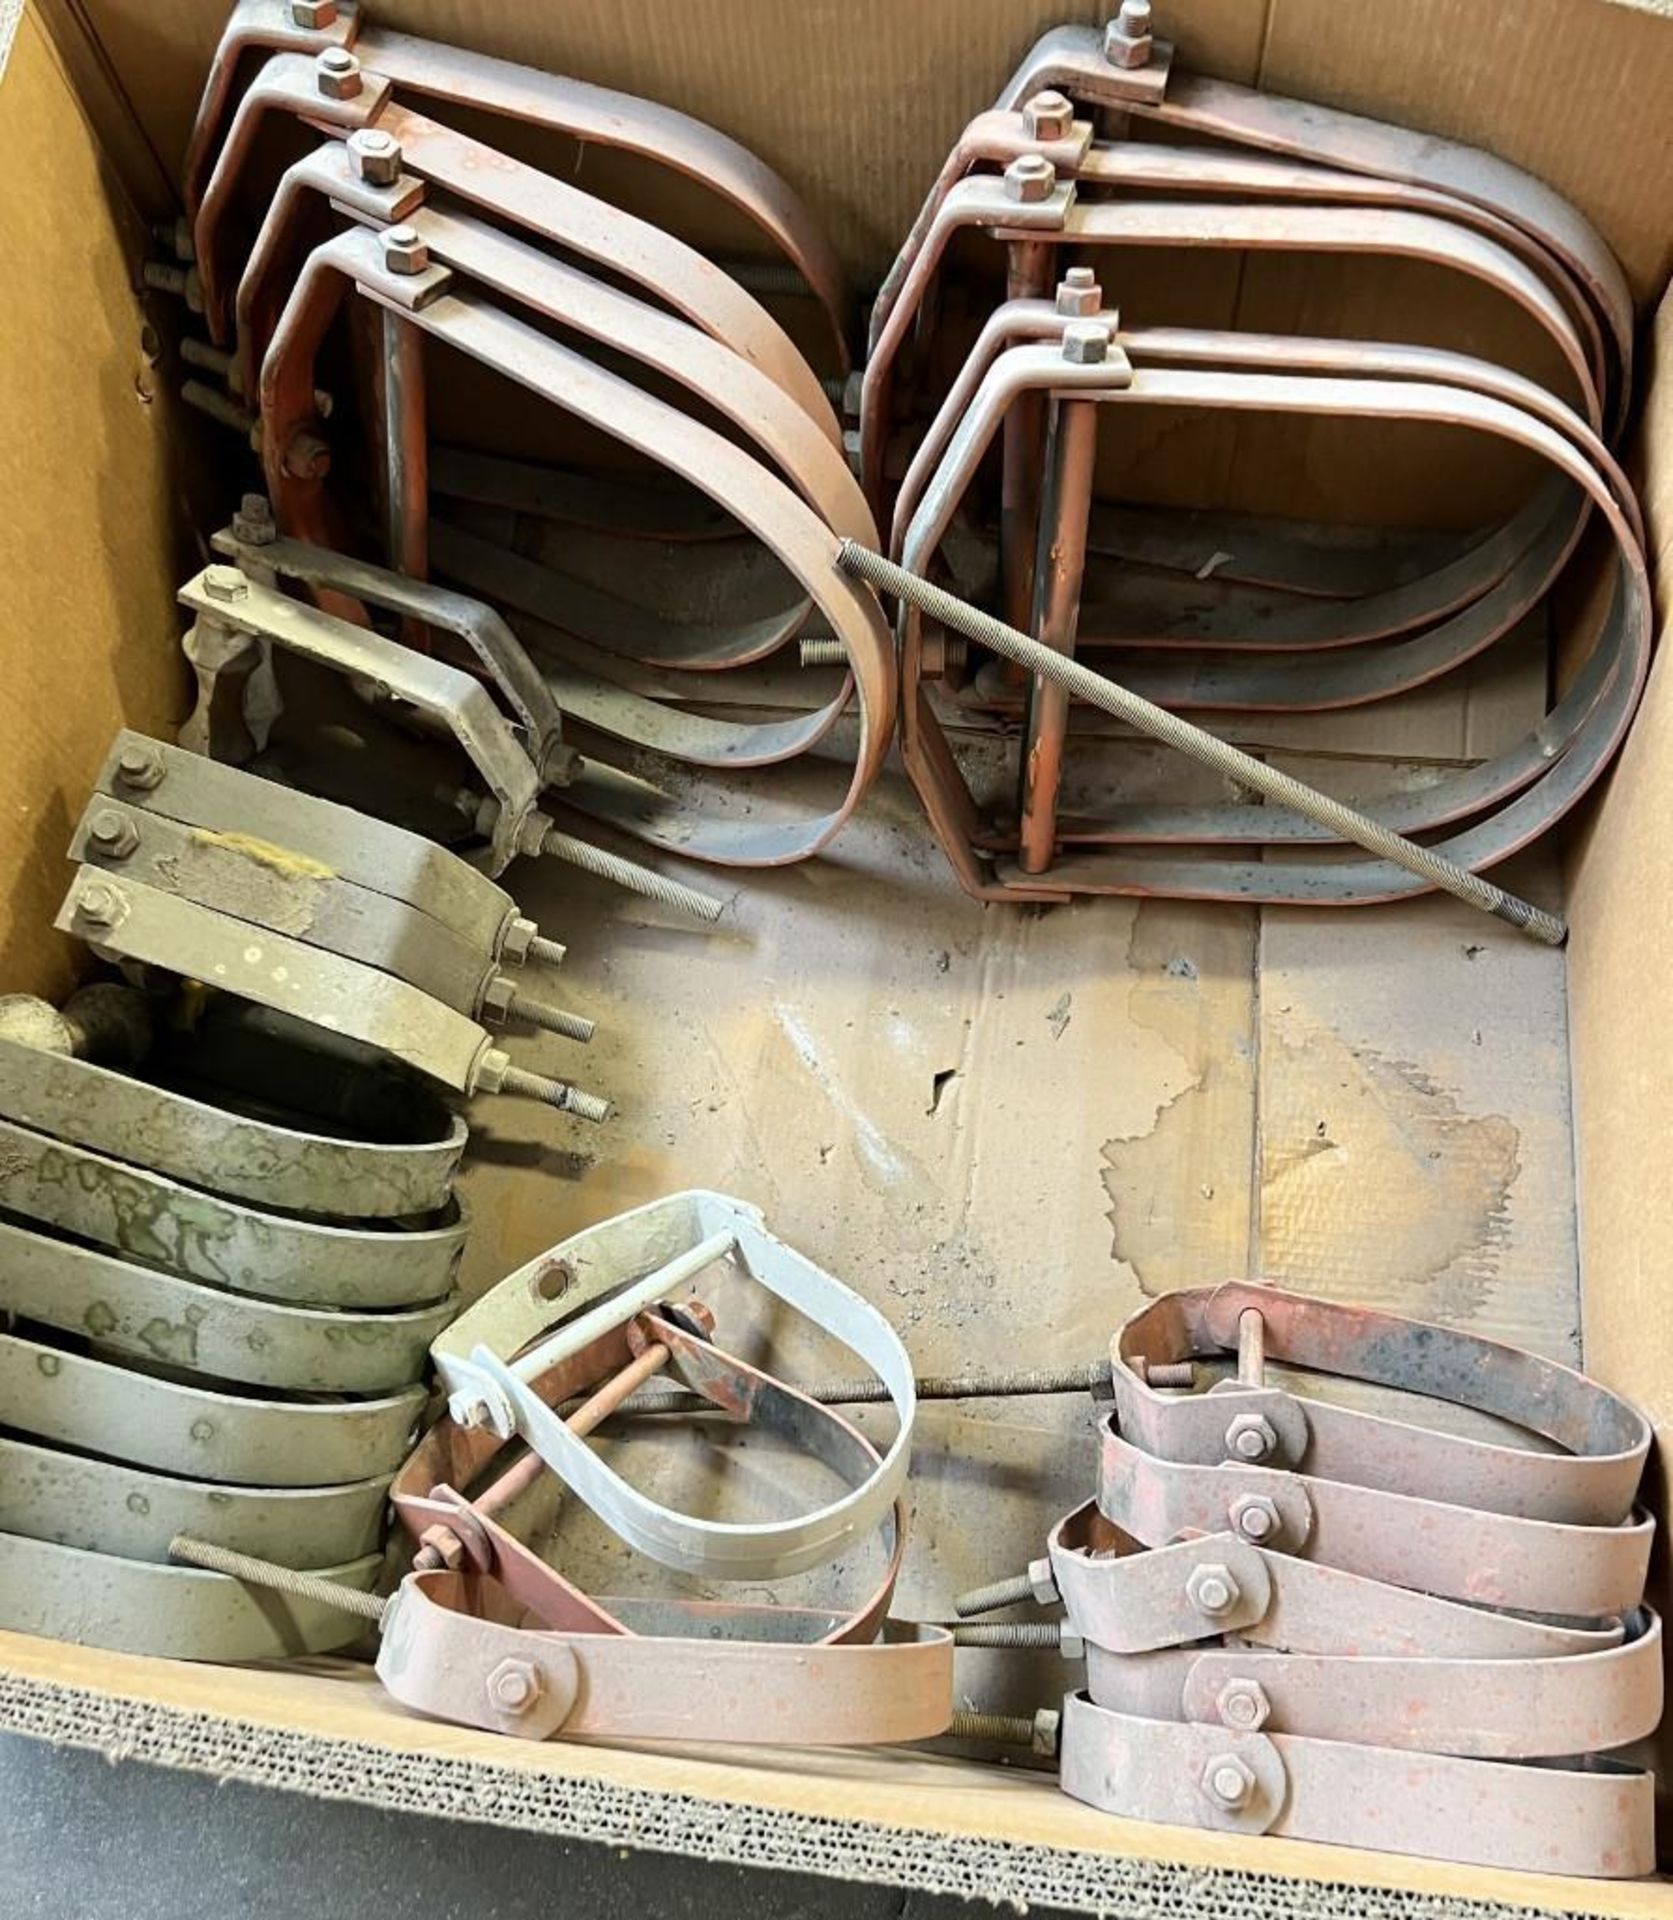 Lot Of (2) Skids. With misc. electrical hardware and pipe hangers. (Rigging/Loading Fee = $100) - Image 9 of 9